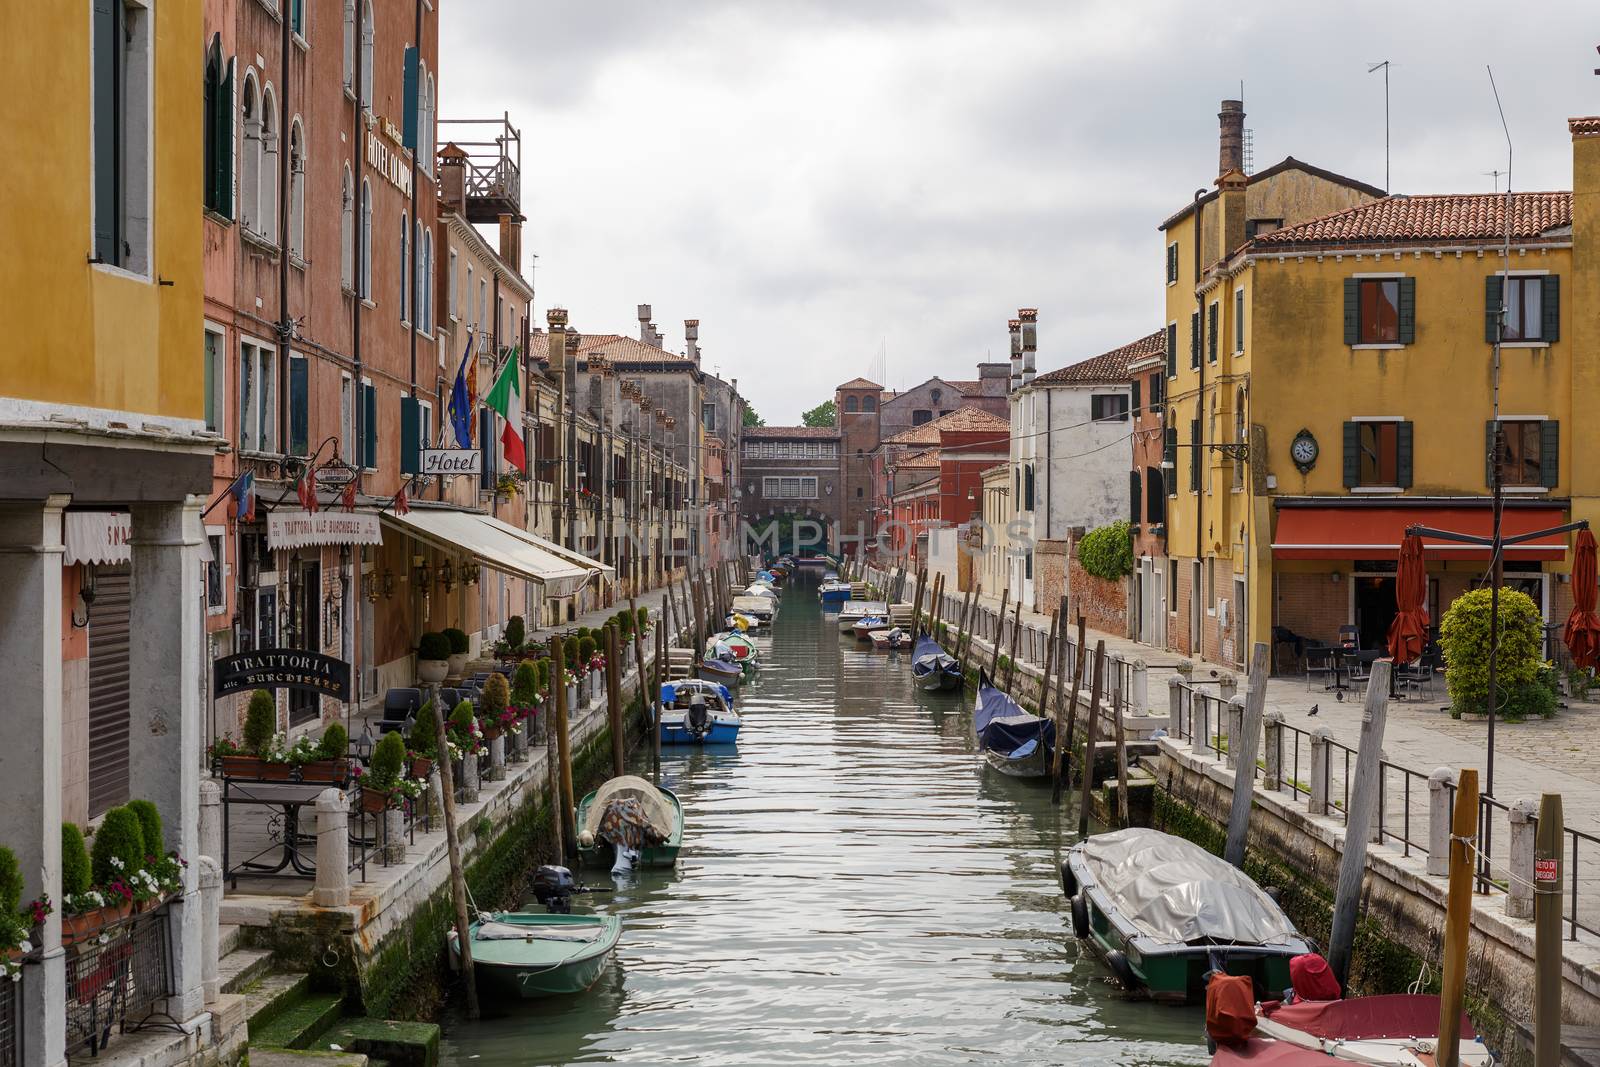 Venice, Italy - CIRCA 2020: View of an empty water canal in Venice Italy. Concept of the effects of lock down due to CoronaVirus COVID-19. Picturesque landscape. by dugulan